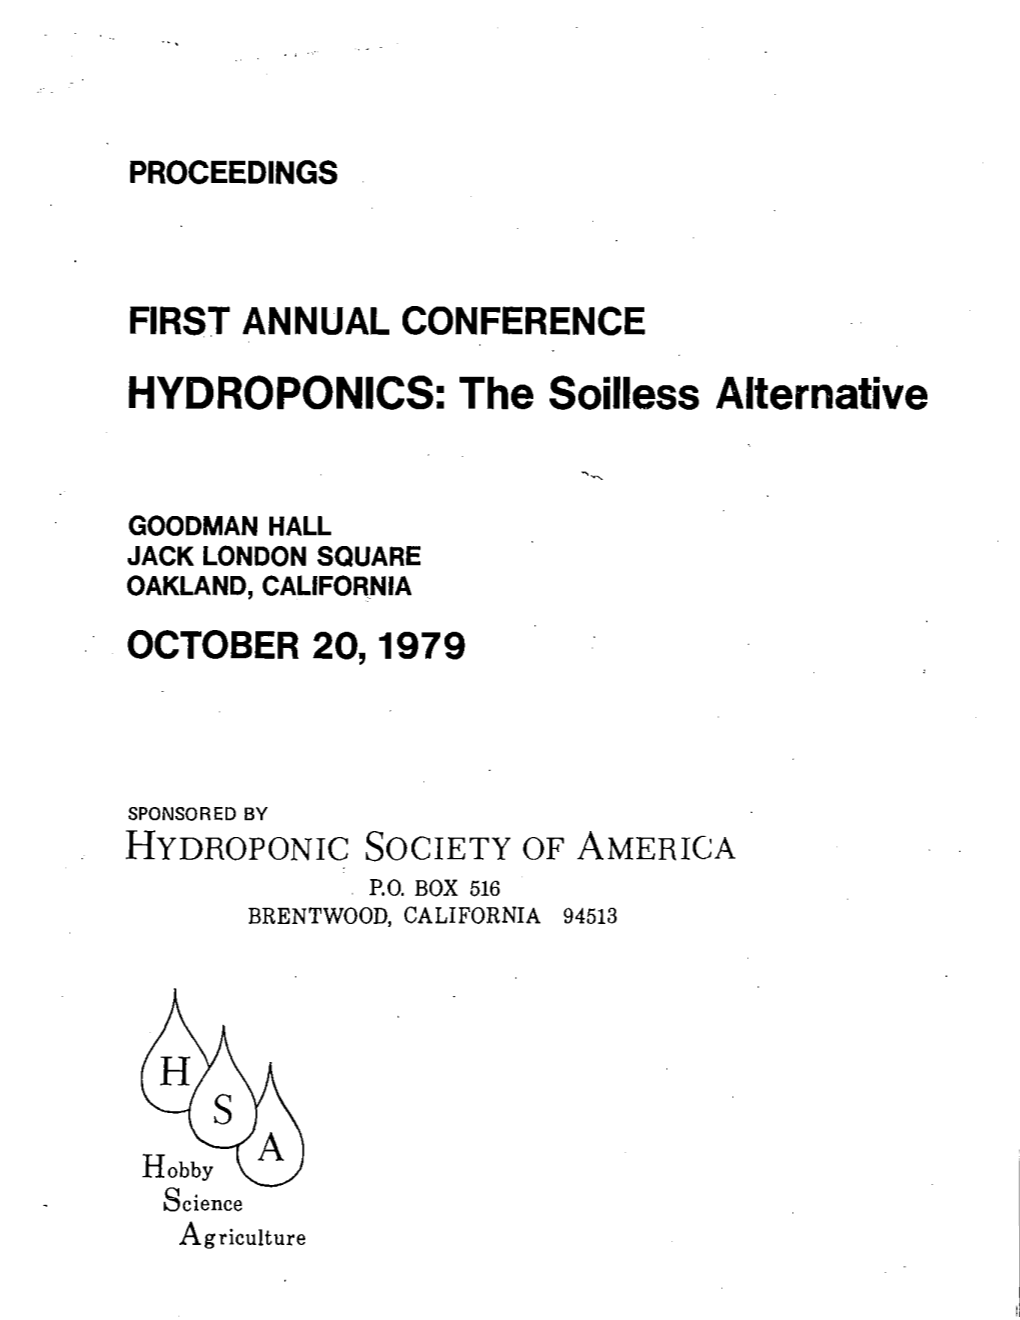 Arstannualconference October 20, 1979